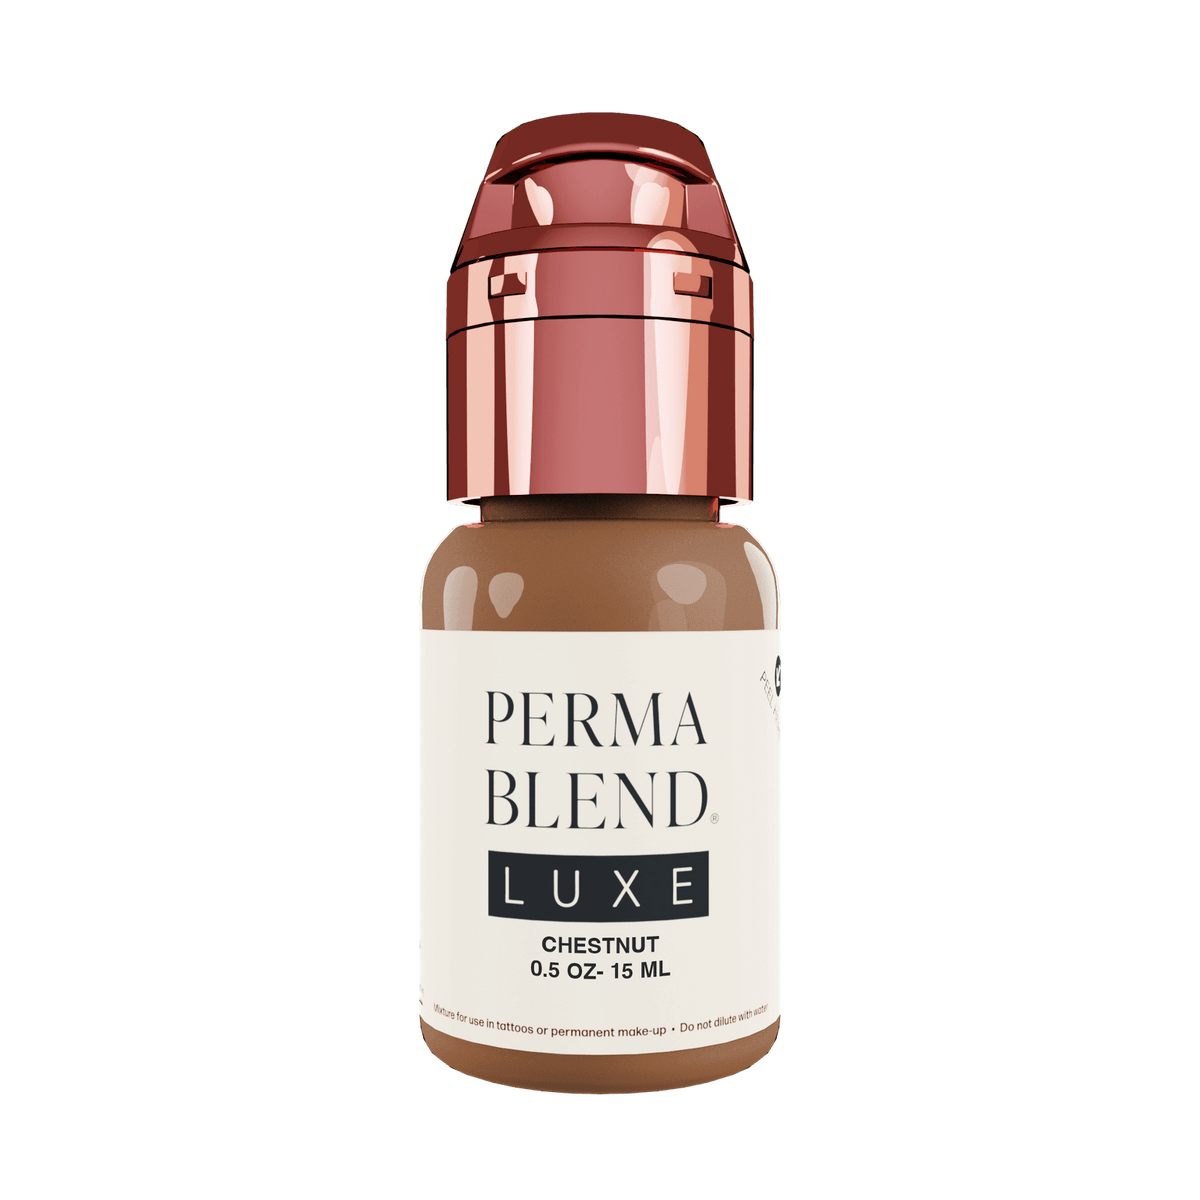 Perma Blend Luxe Chestnut